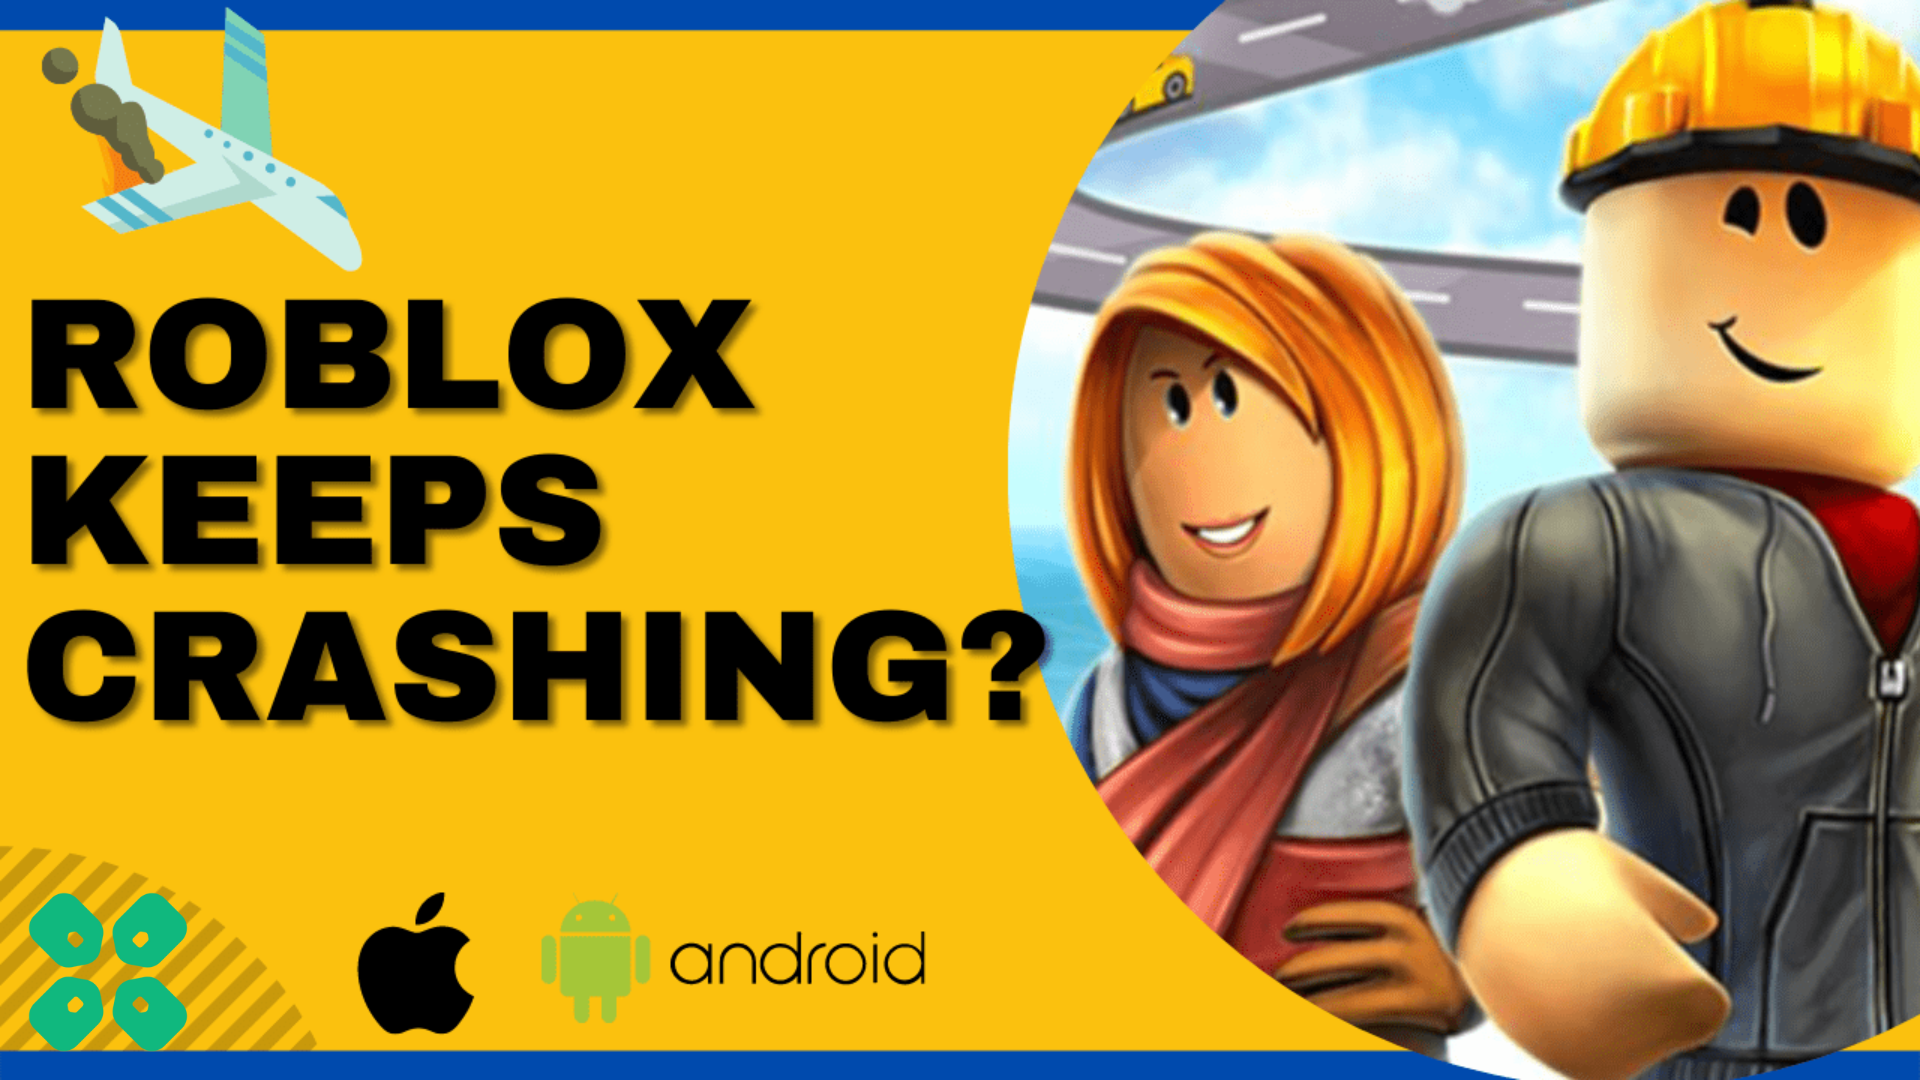 Roblox app in android is randomly crashing - Mobile Bugs - Developer Forum